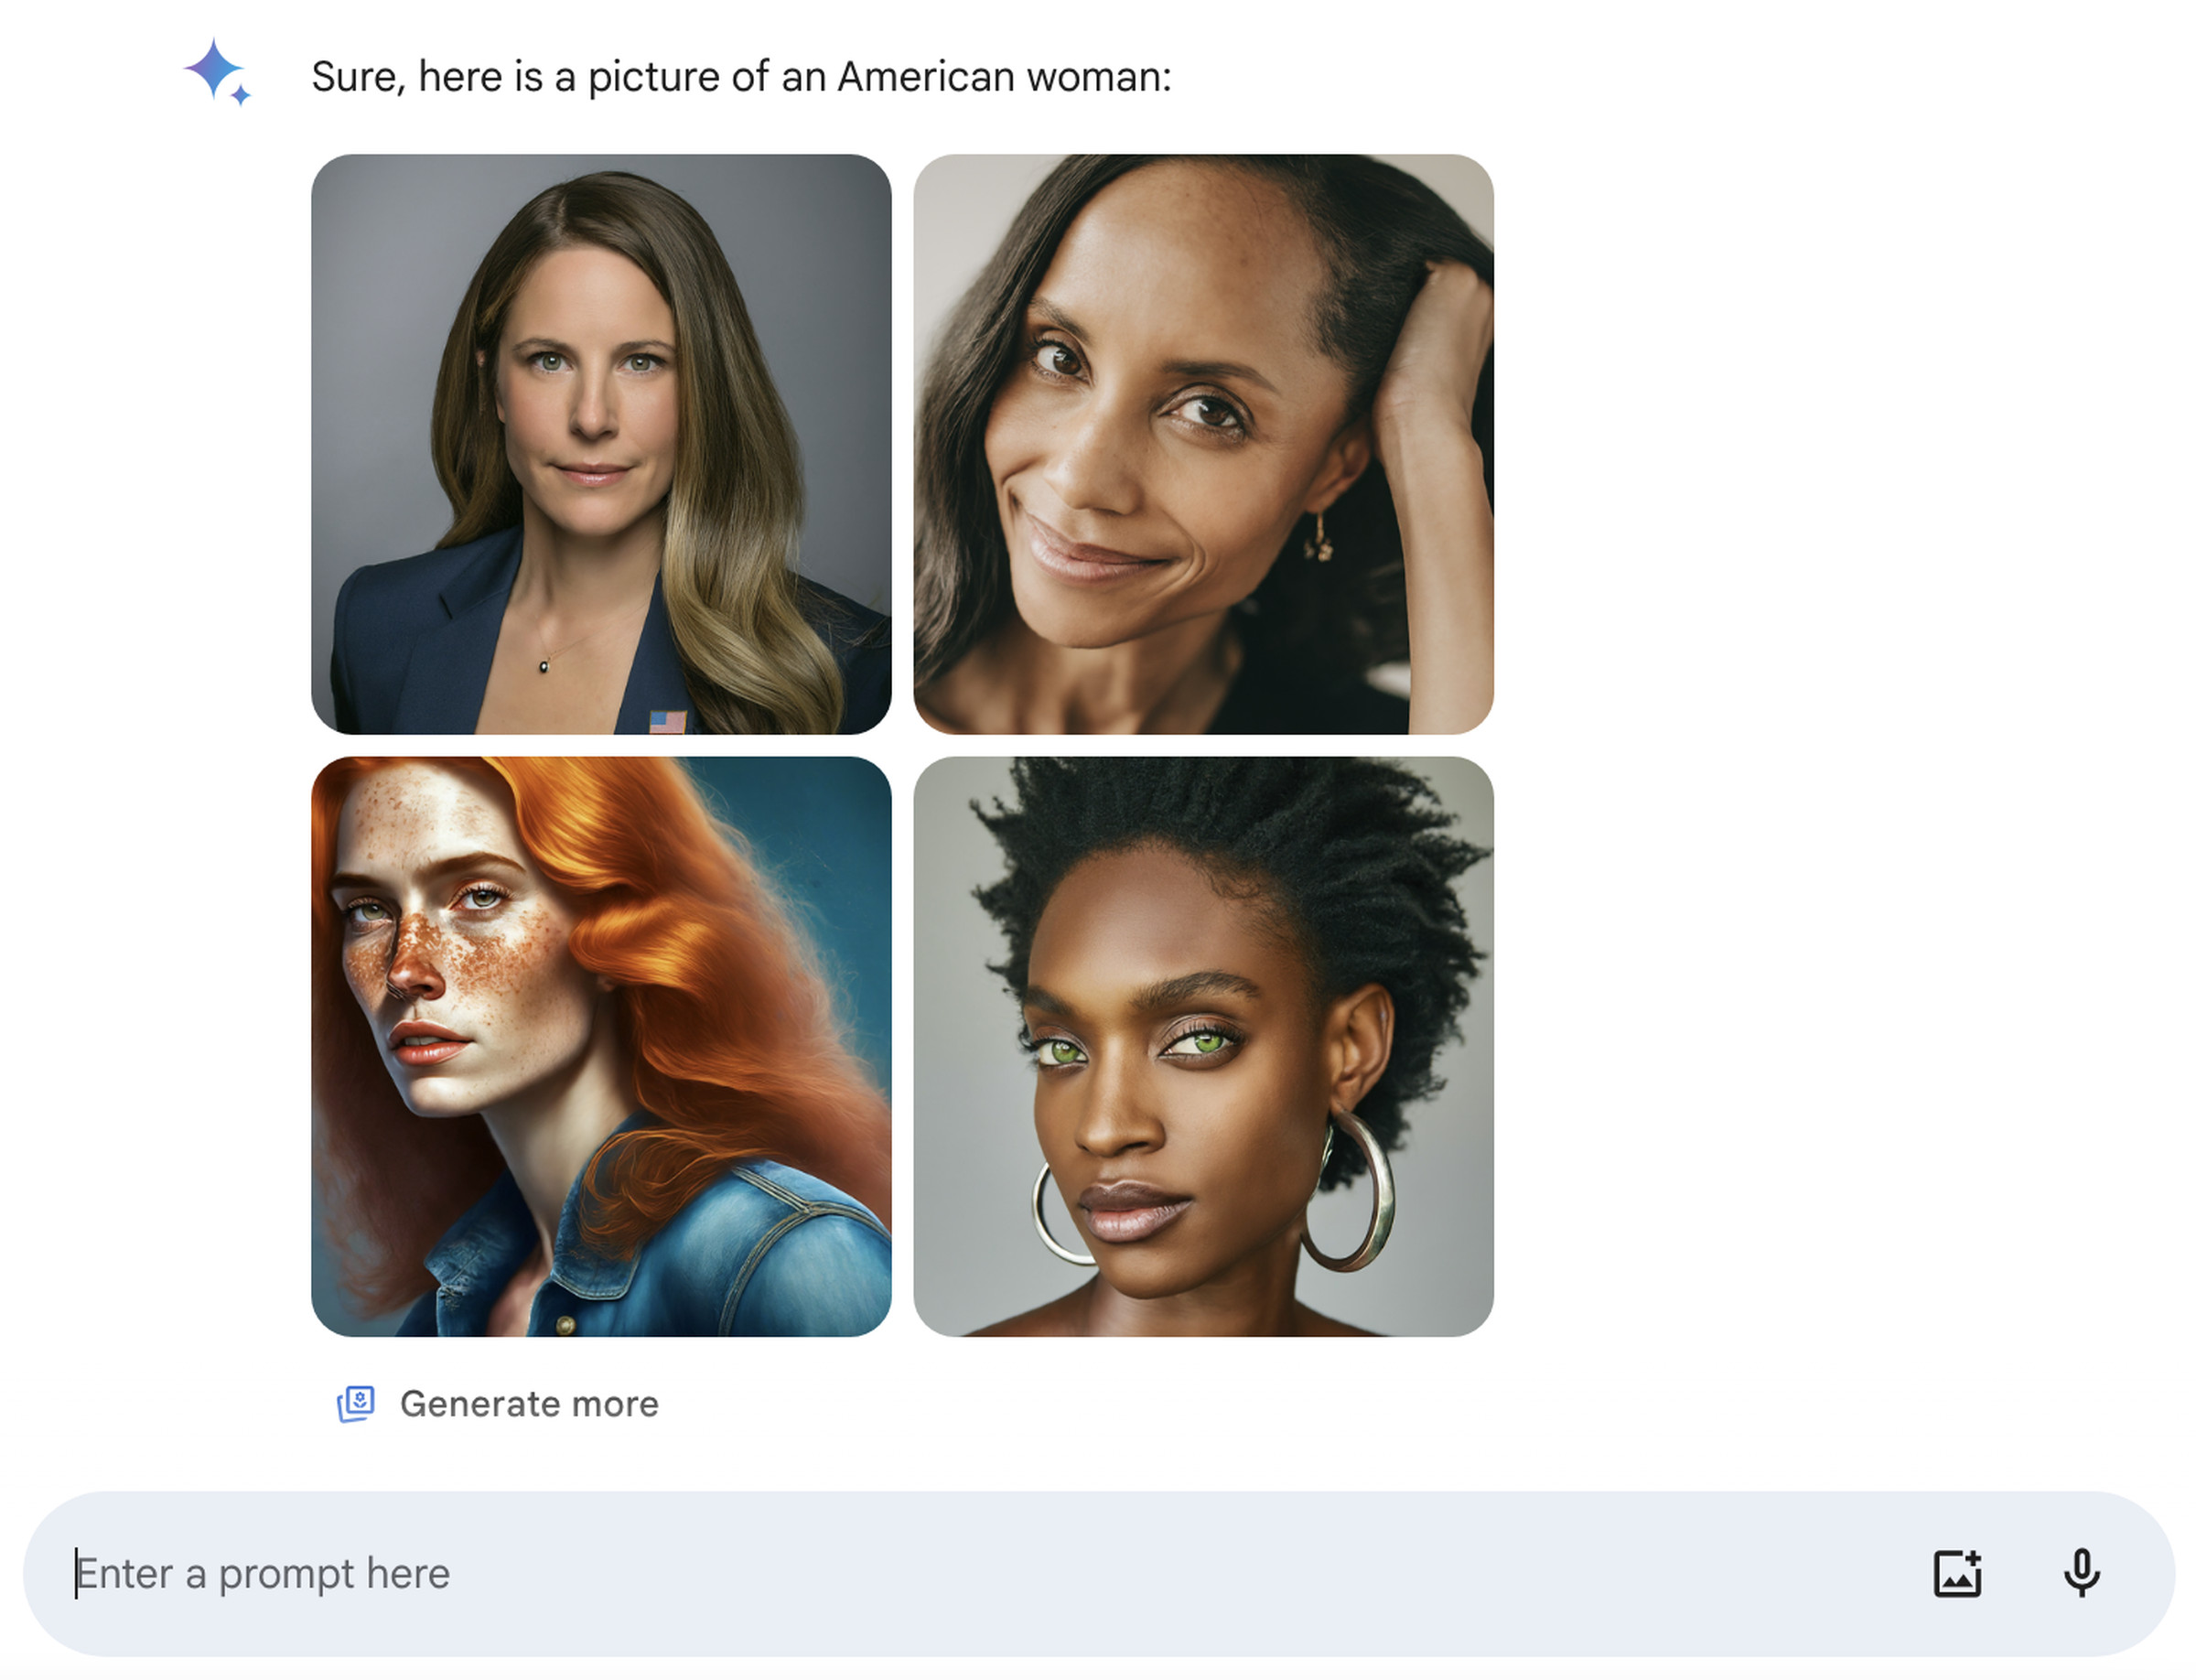 Gemini results with AI images of “an American woman,” including two white-looking women.